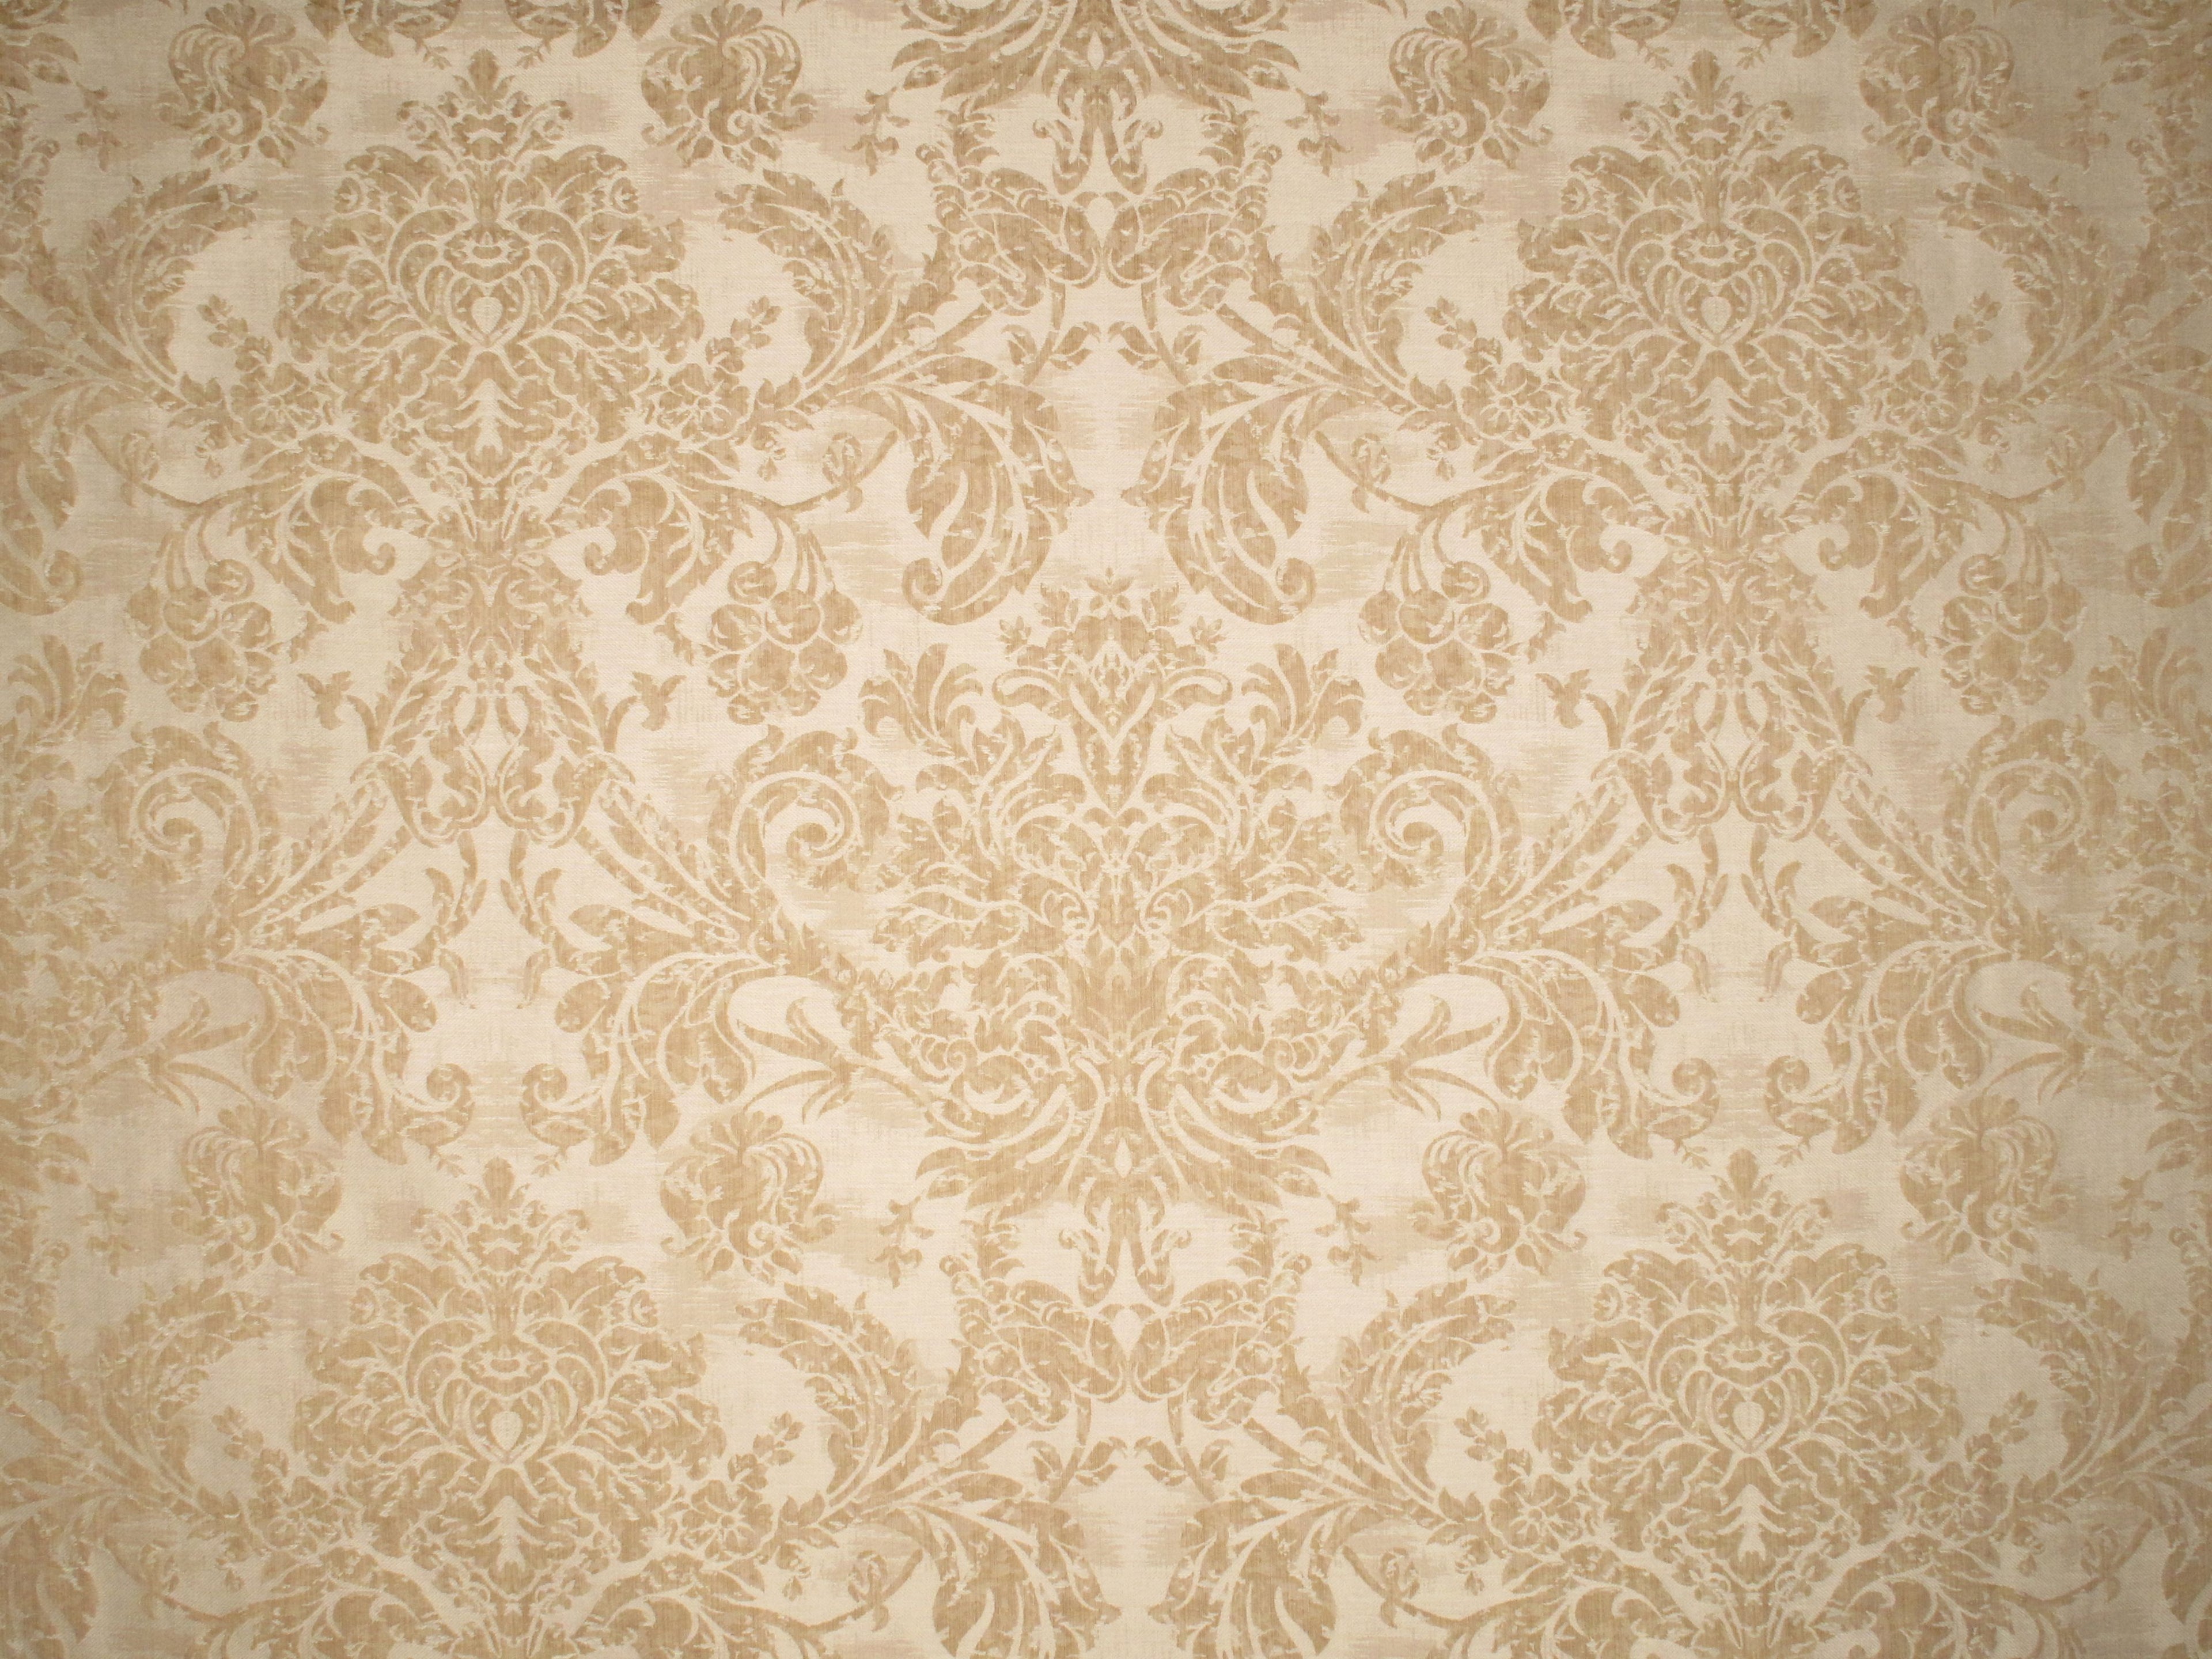 Fabiana fabric in biscotti color - pattern number A0 00039717 - by Scalamandre in the Old World Weavers collection